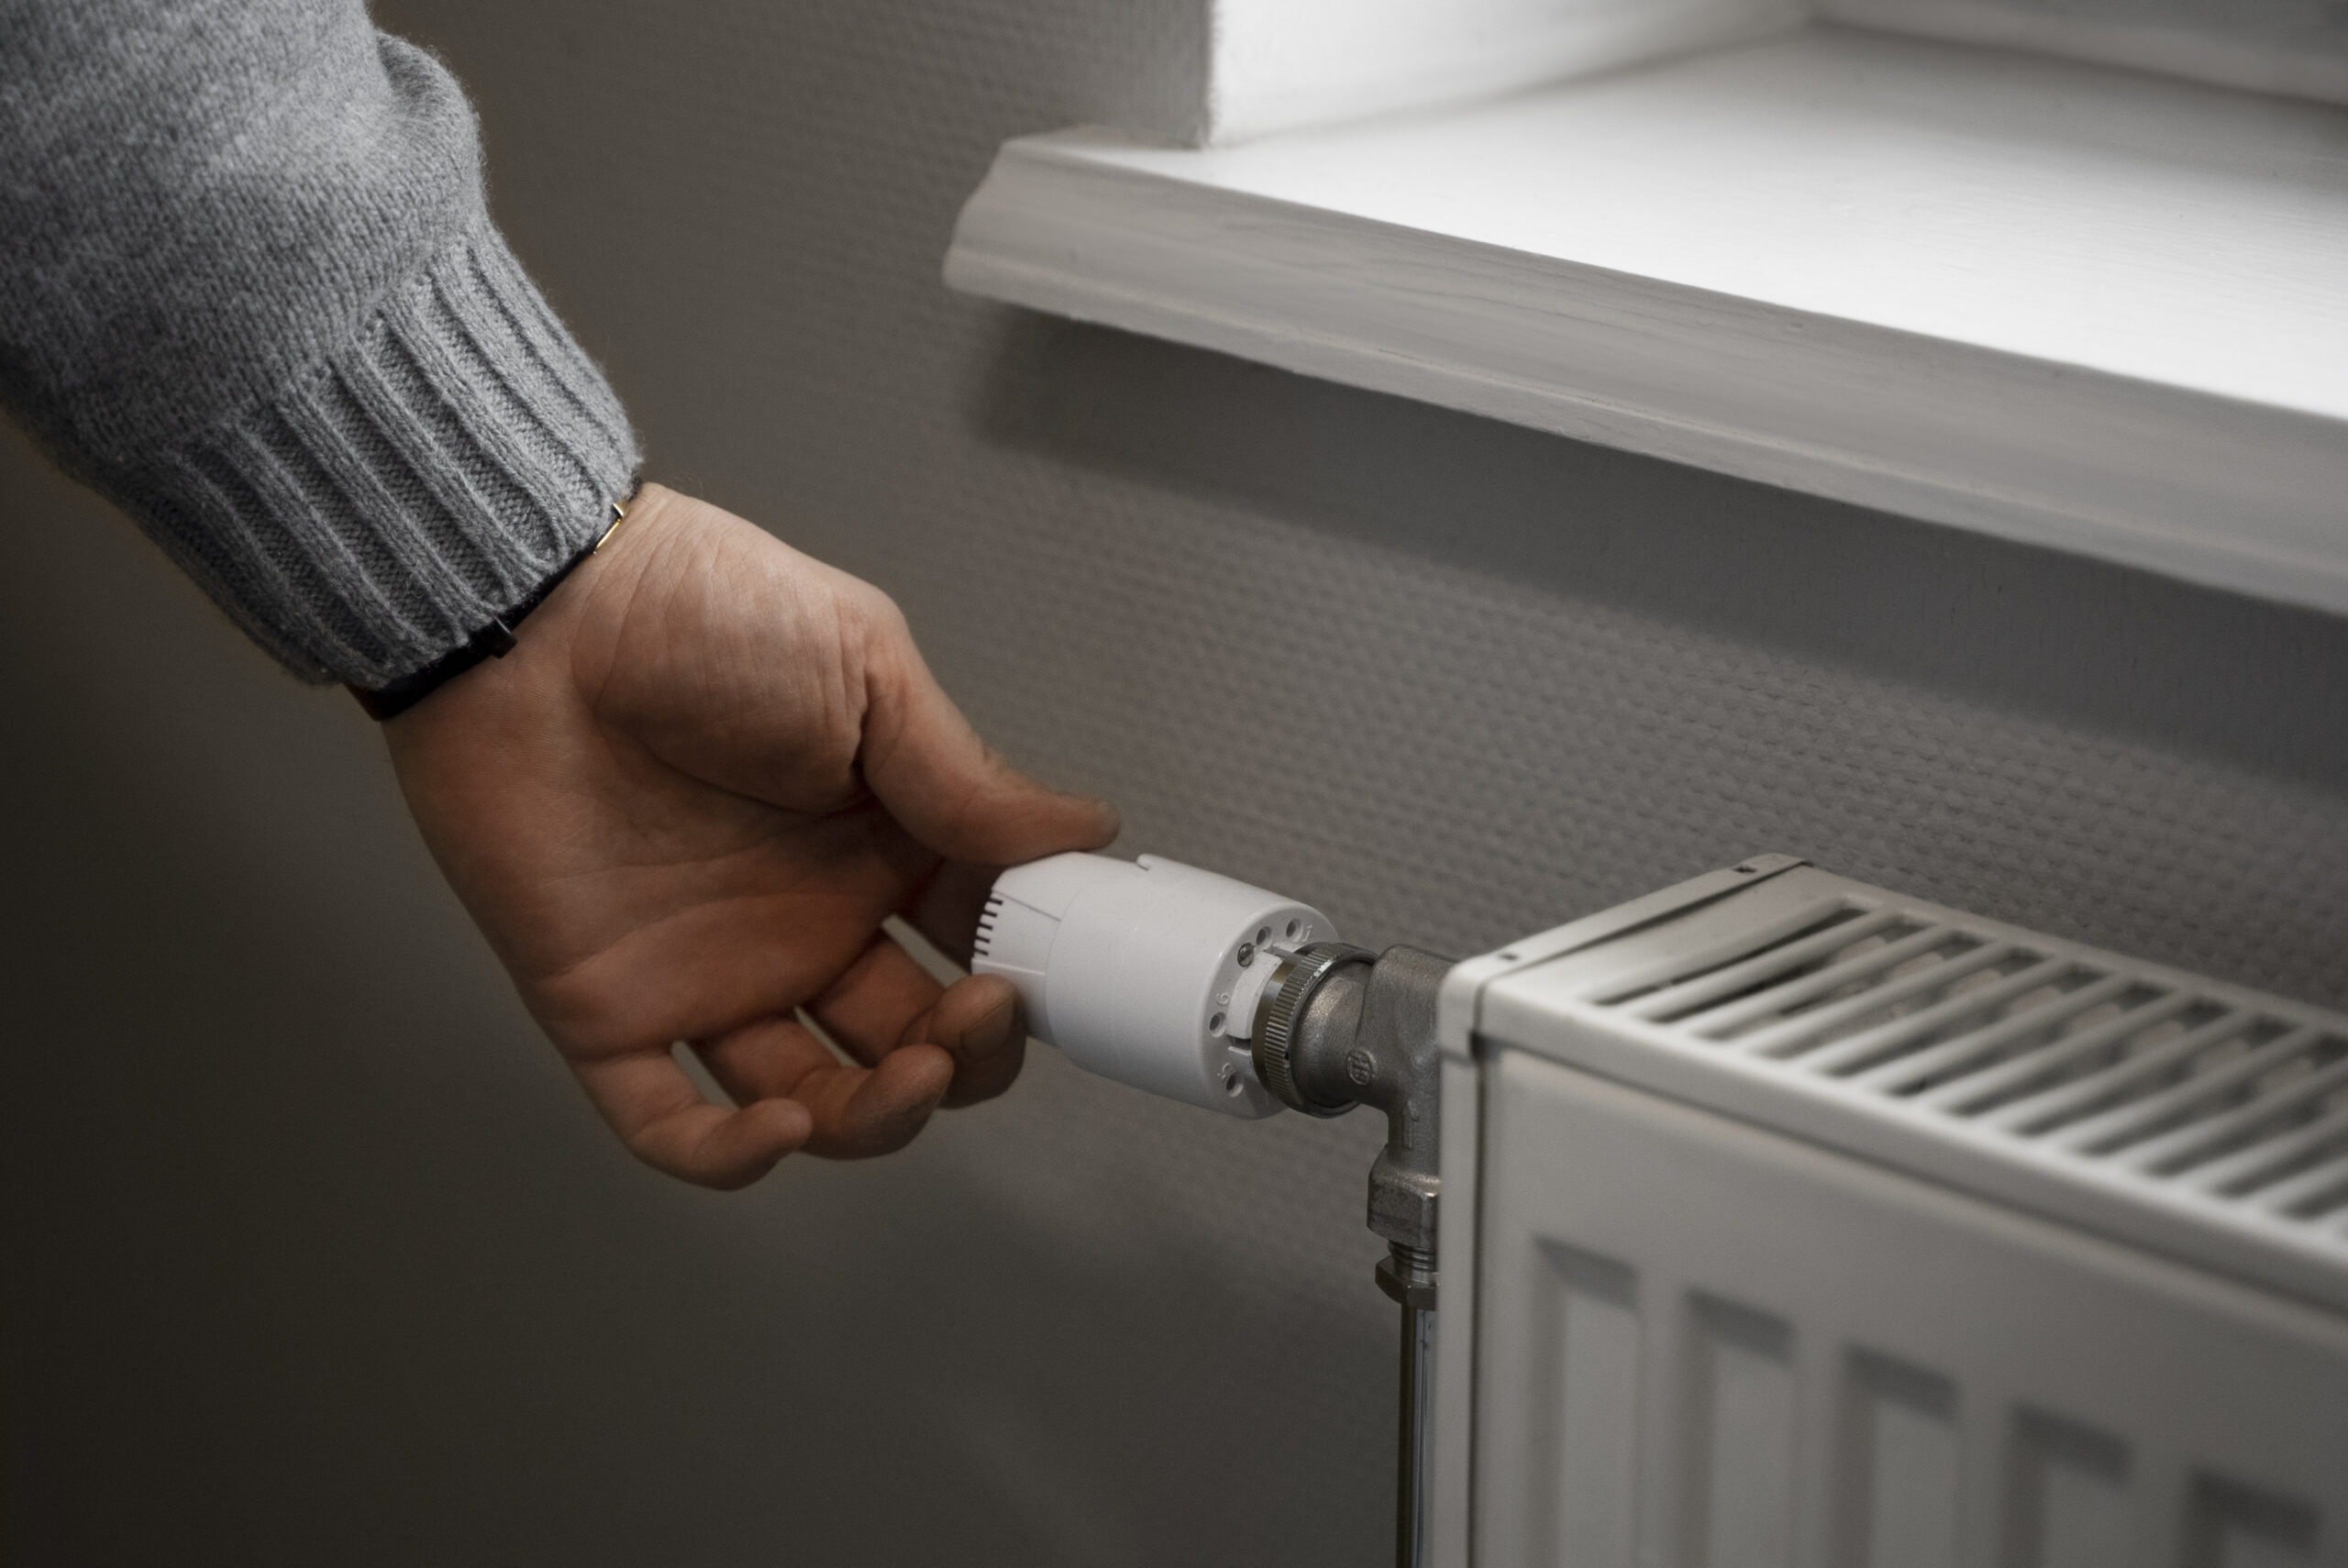 Boiler vs. Water Heater: What's the Difference